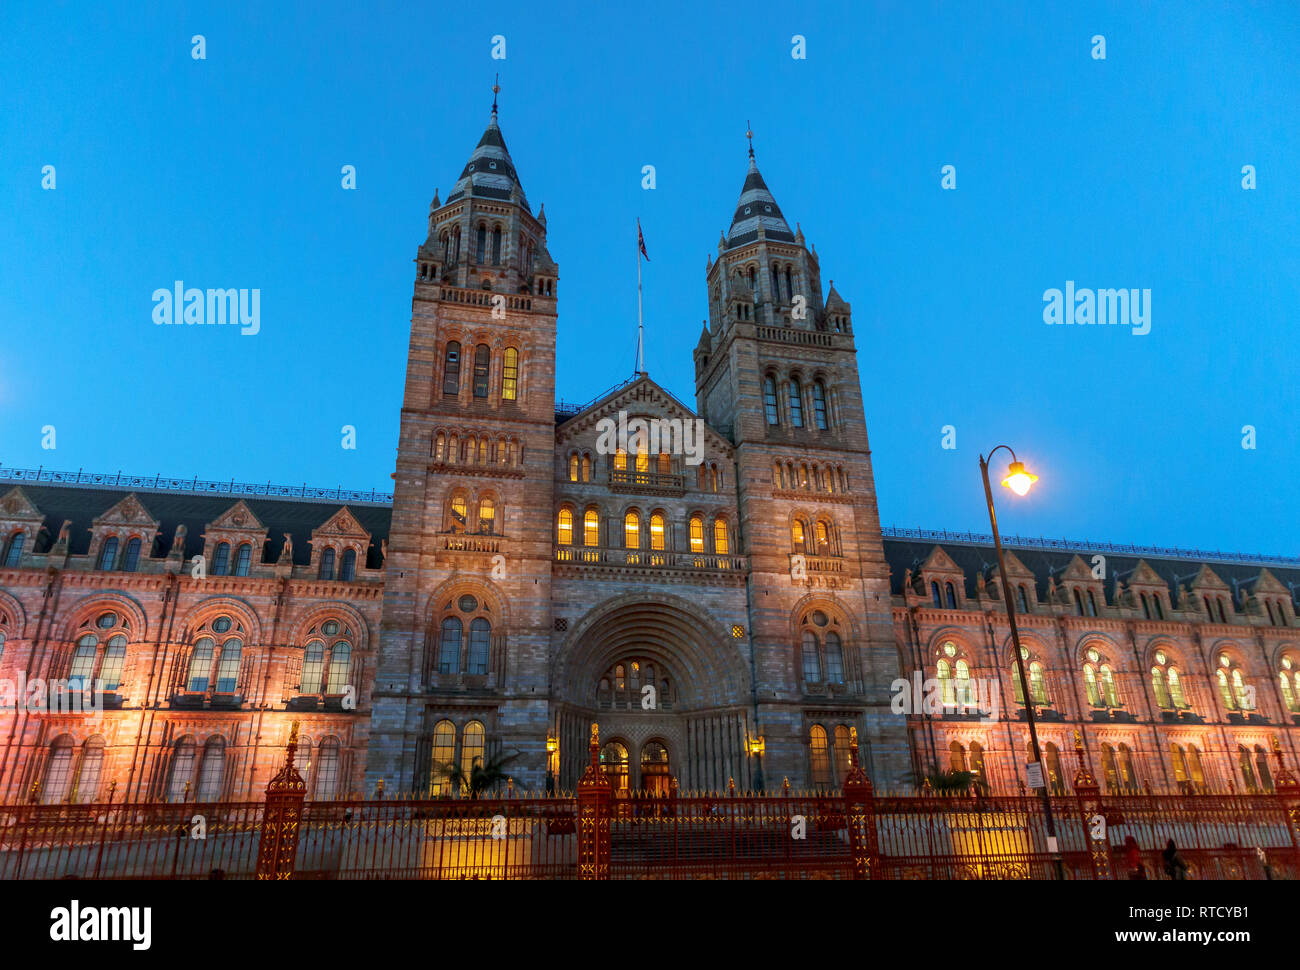 Evening view of the front facade of the iconic Natural History Museum Alfred Waterhouse Building, Cromwell Road, South Kensington, London SW7 Stock Photo